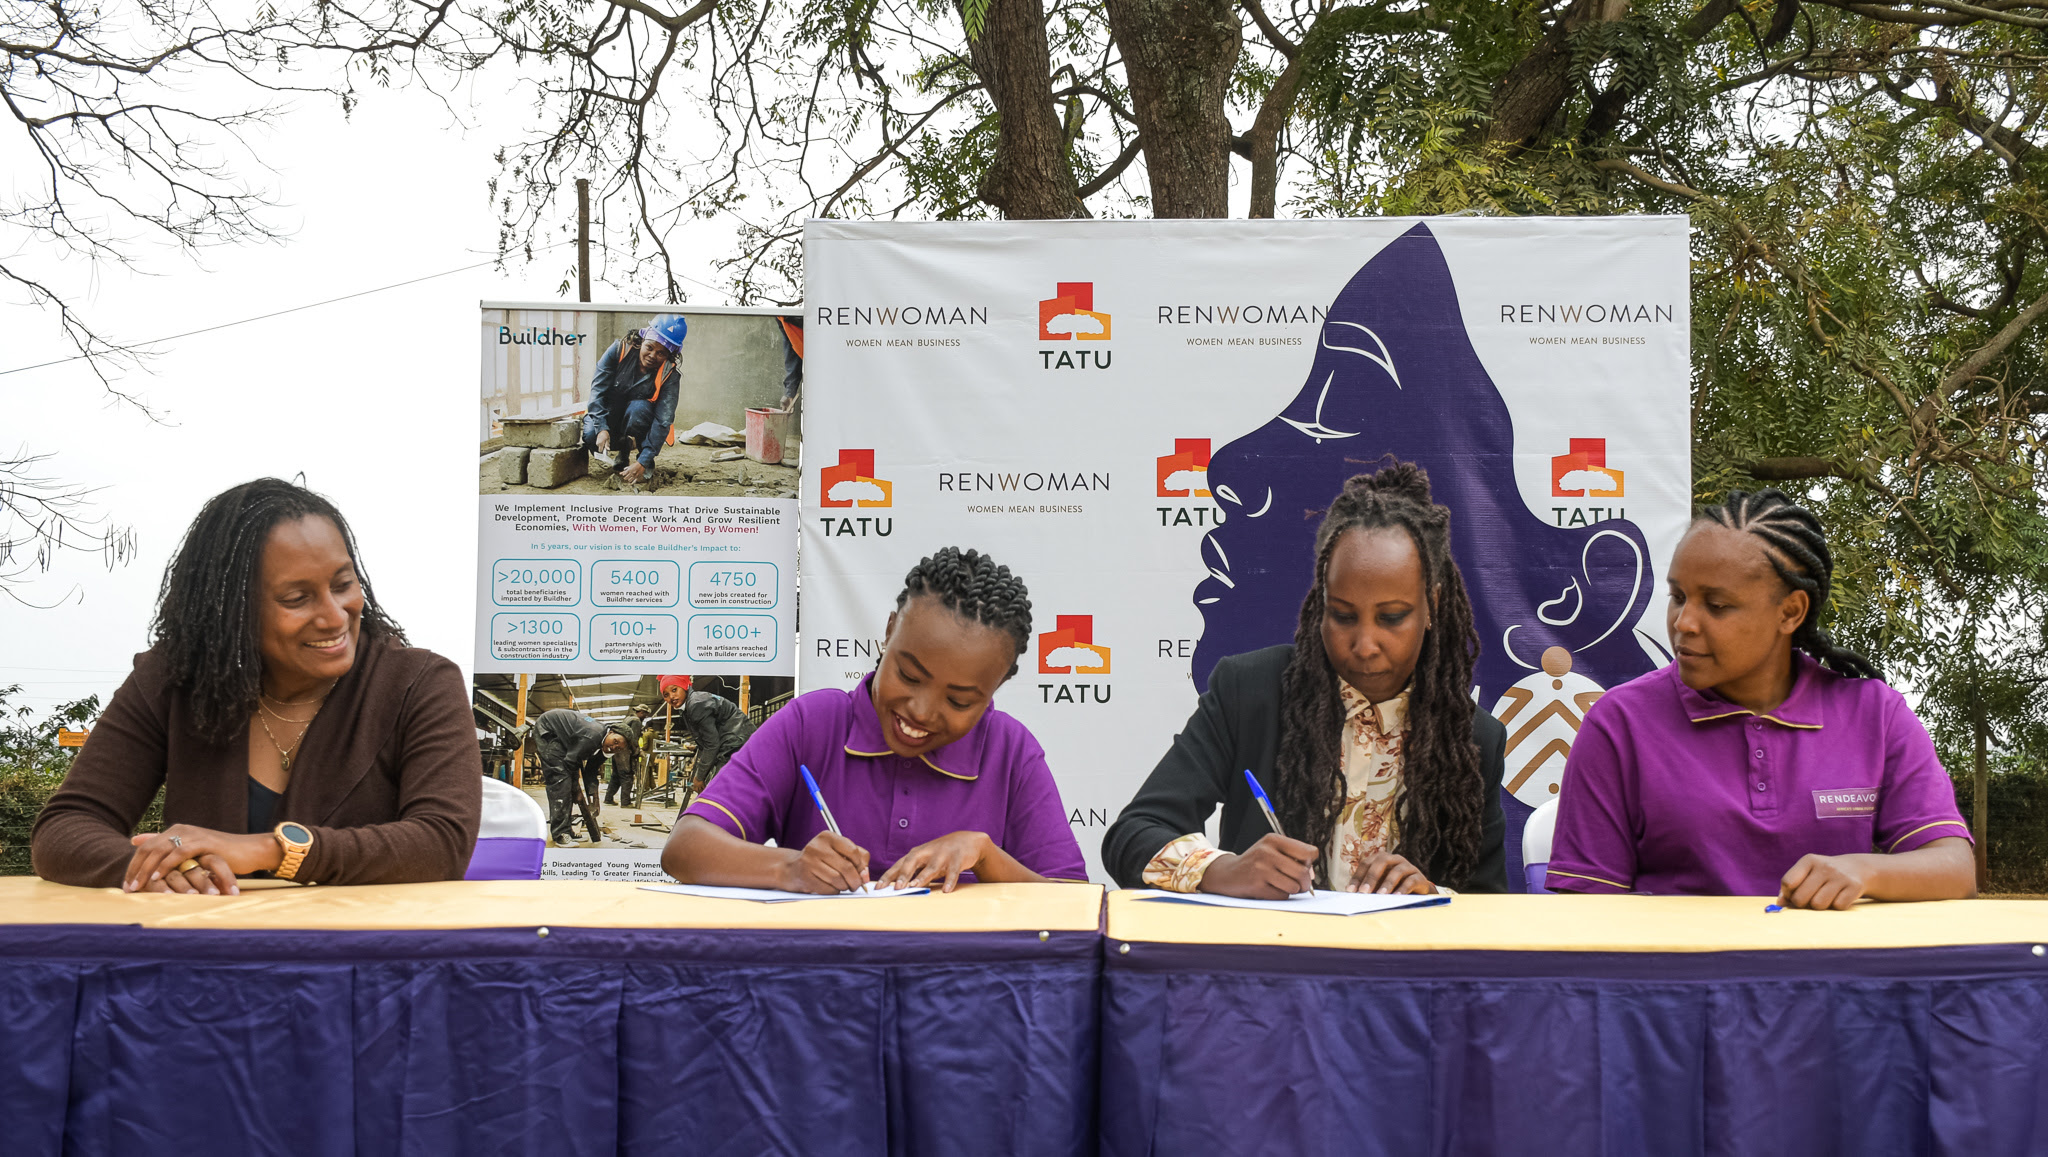 Tatu City, Buildher partner on jobs for women in construction sector